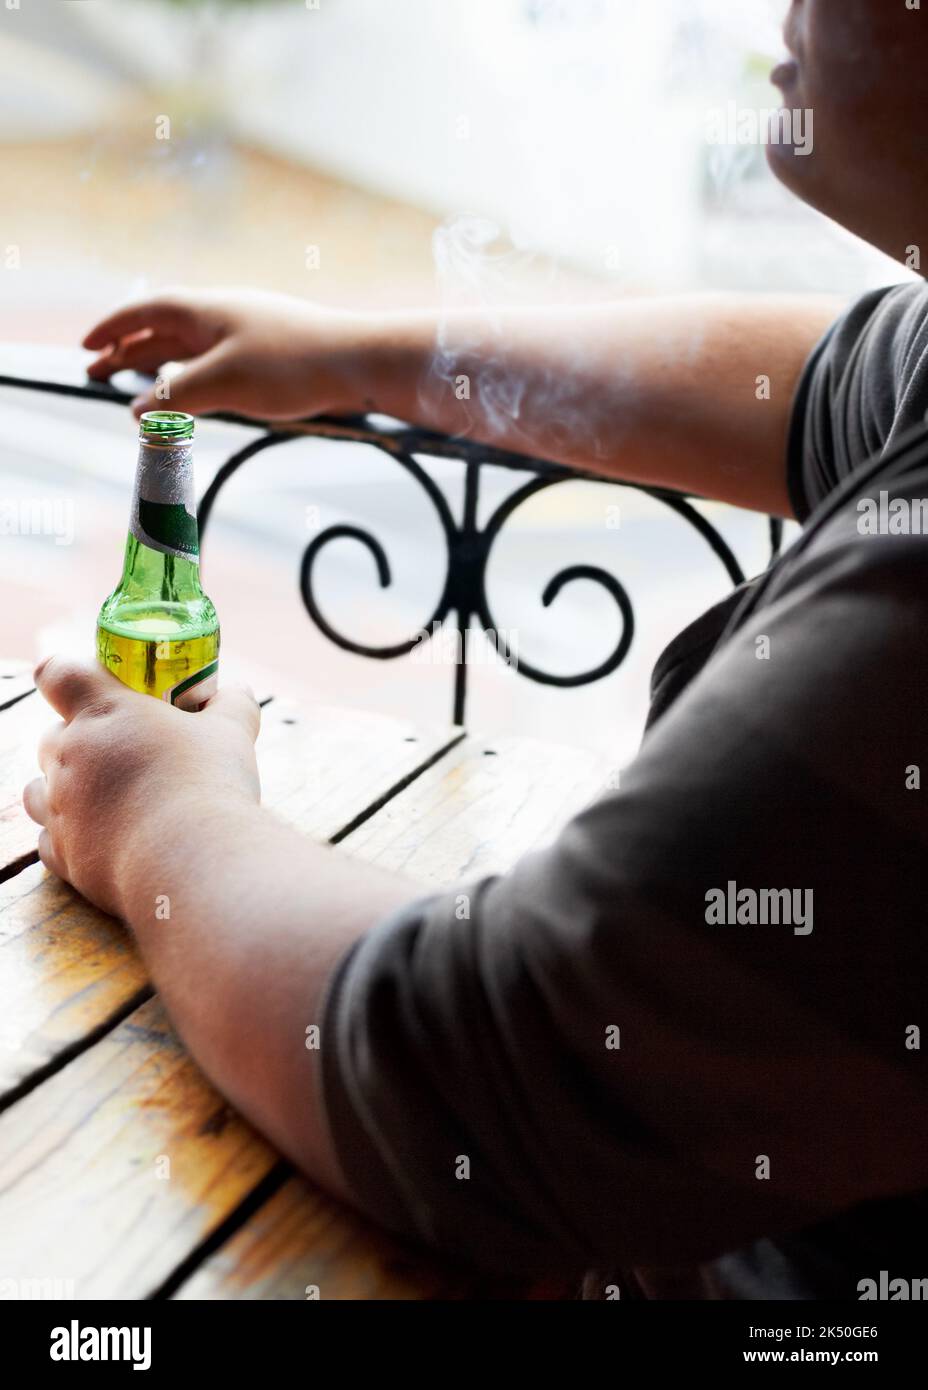 Indulging in lifes little pleasures. A cropped image of a young man smoking while sitting with a beer in front of him. Stock Photo